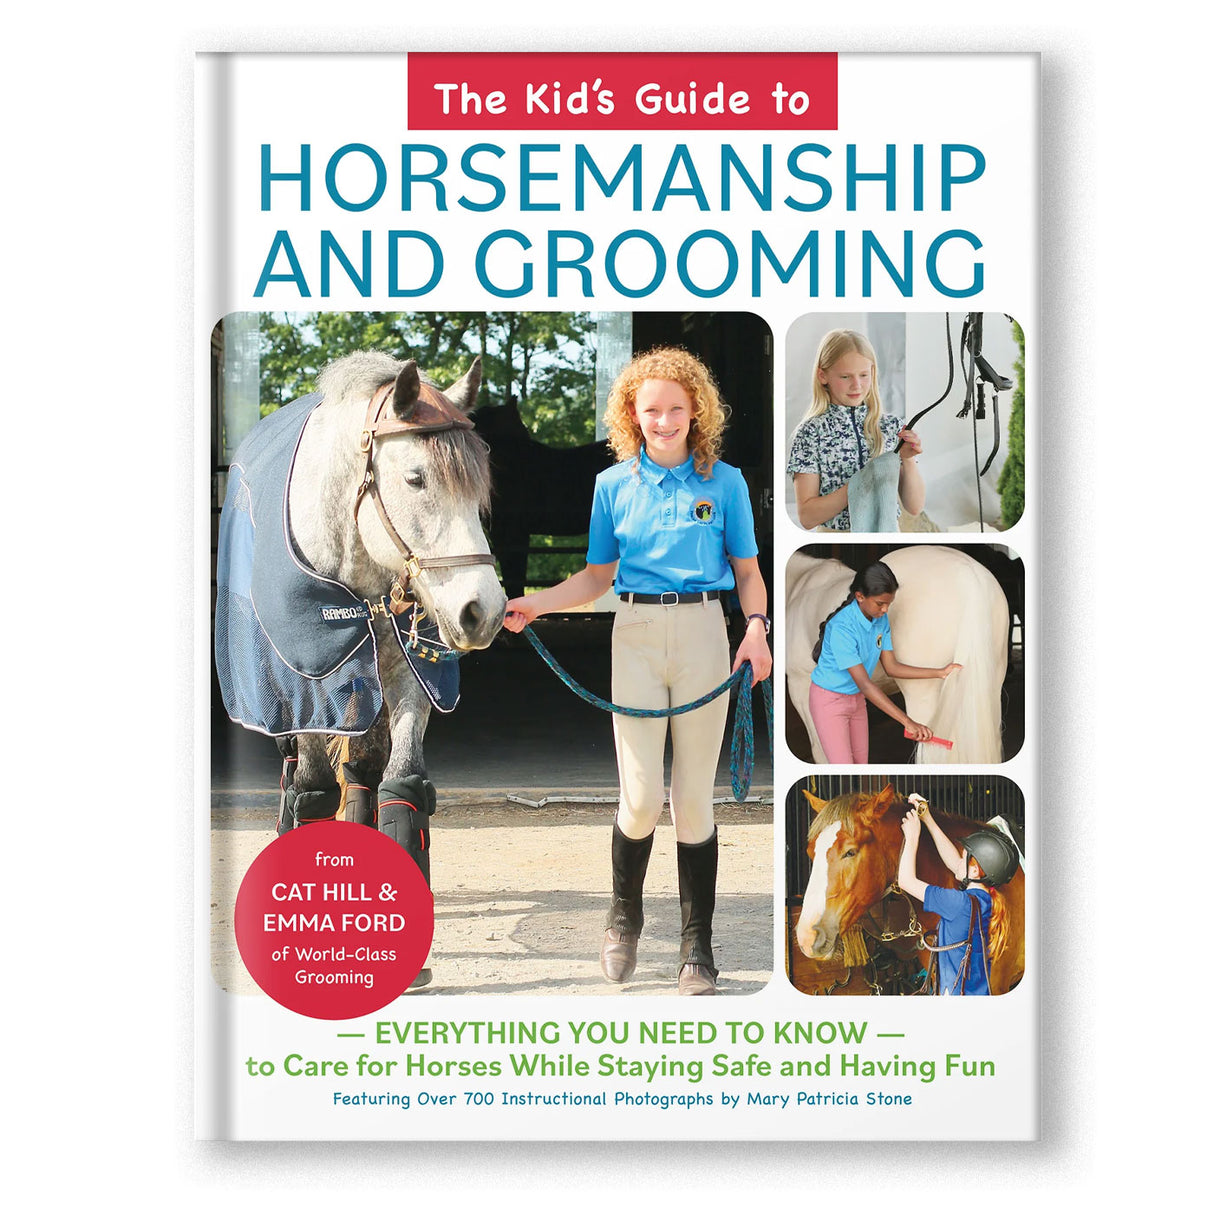 The Kid's Guide To Horsemanship And Grooming